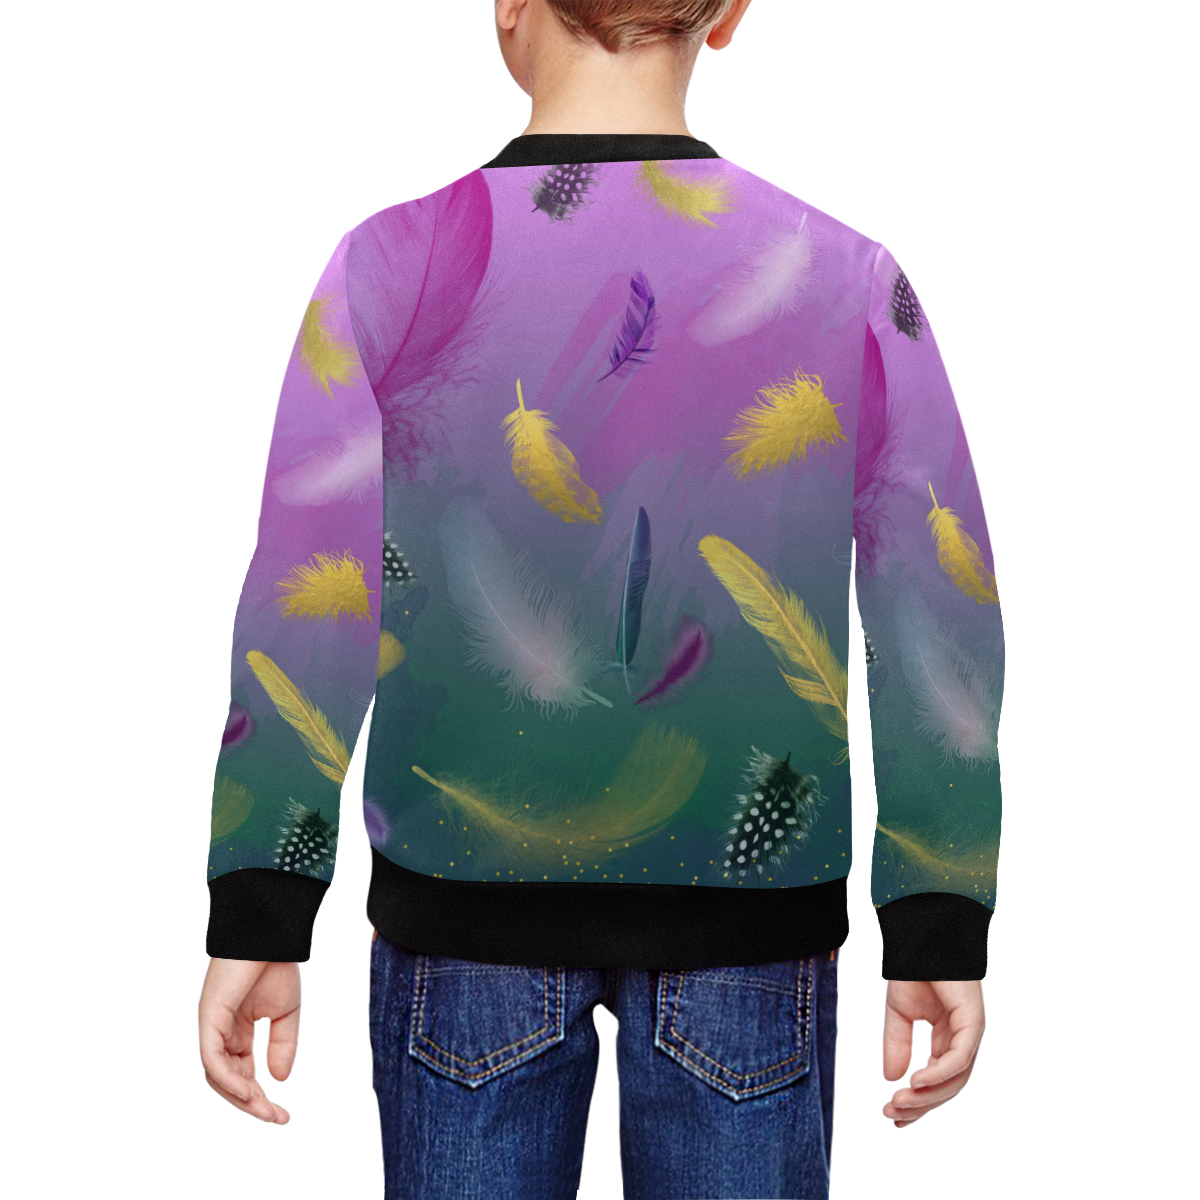 Dancing Feathers - Pink and Green All Over Print Crewneck Sweatshirt for Kids (Model H29)